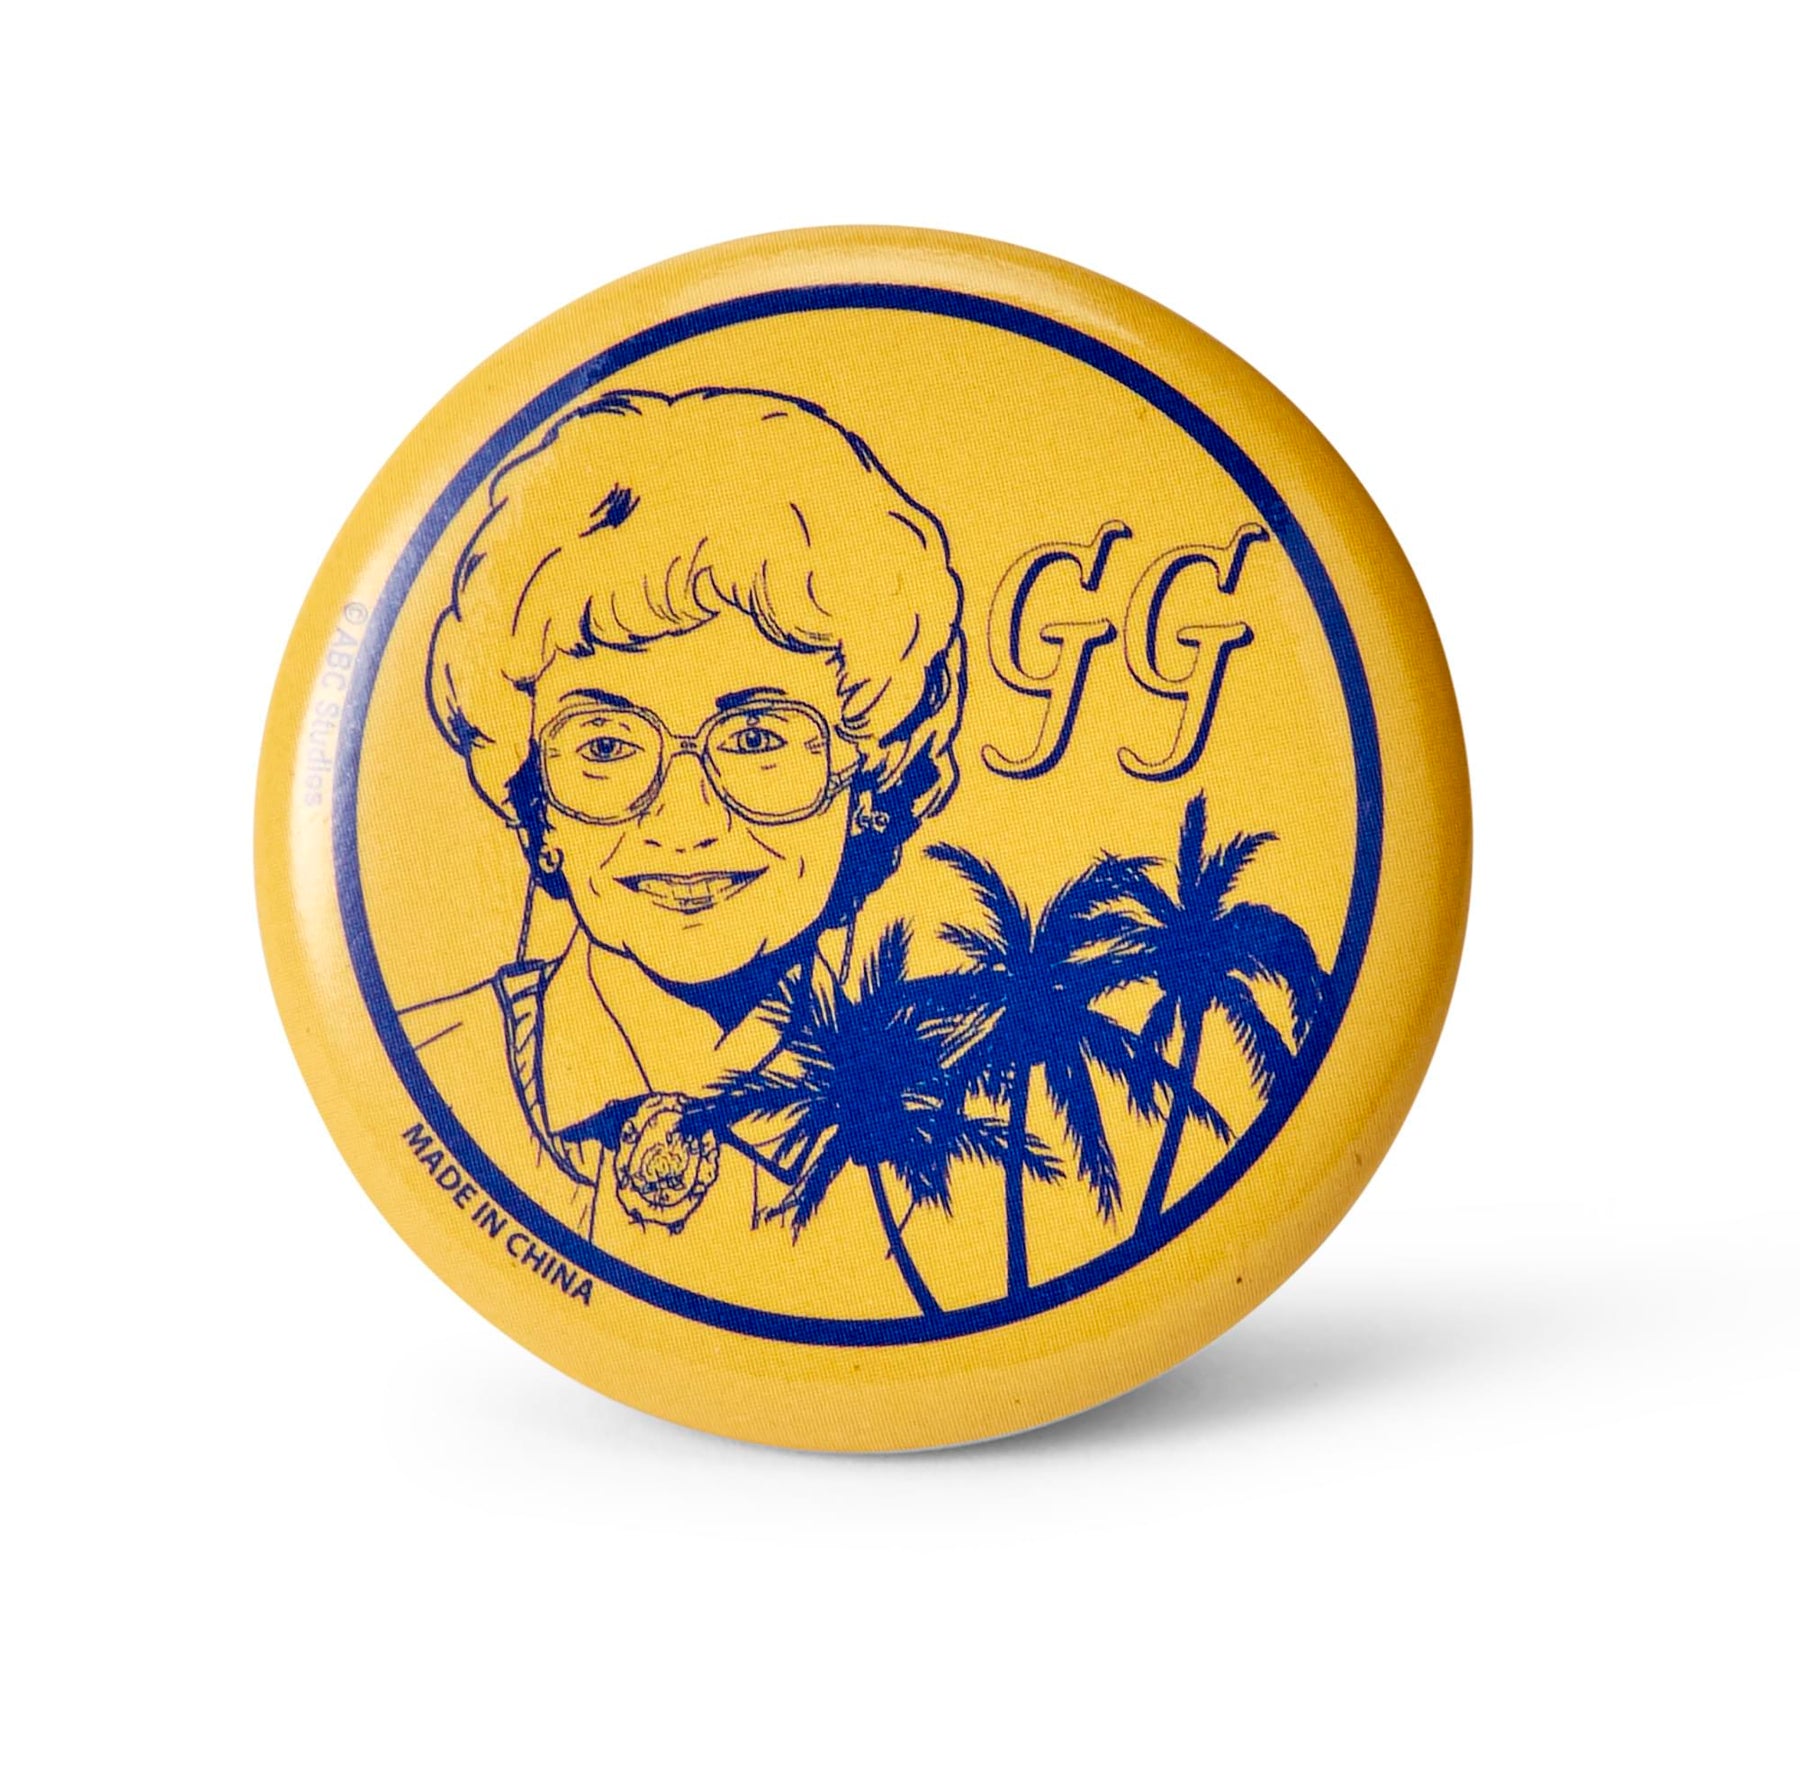 The Golden Girls Button Pin Set | Exclusive Dorothy, Rose, Blanche & Sophia Pins